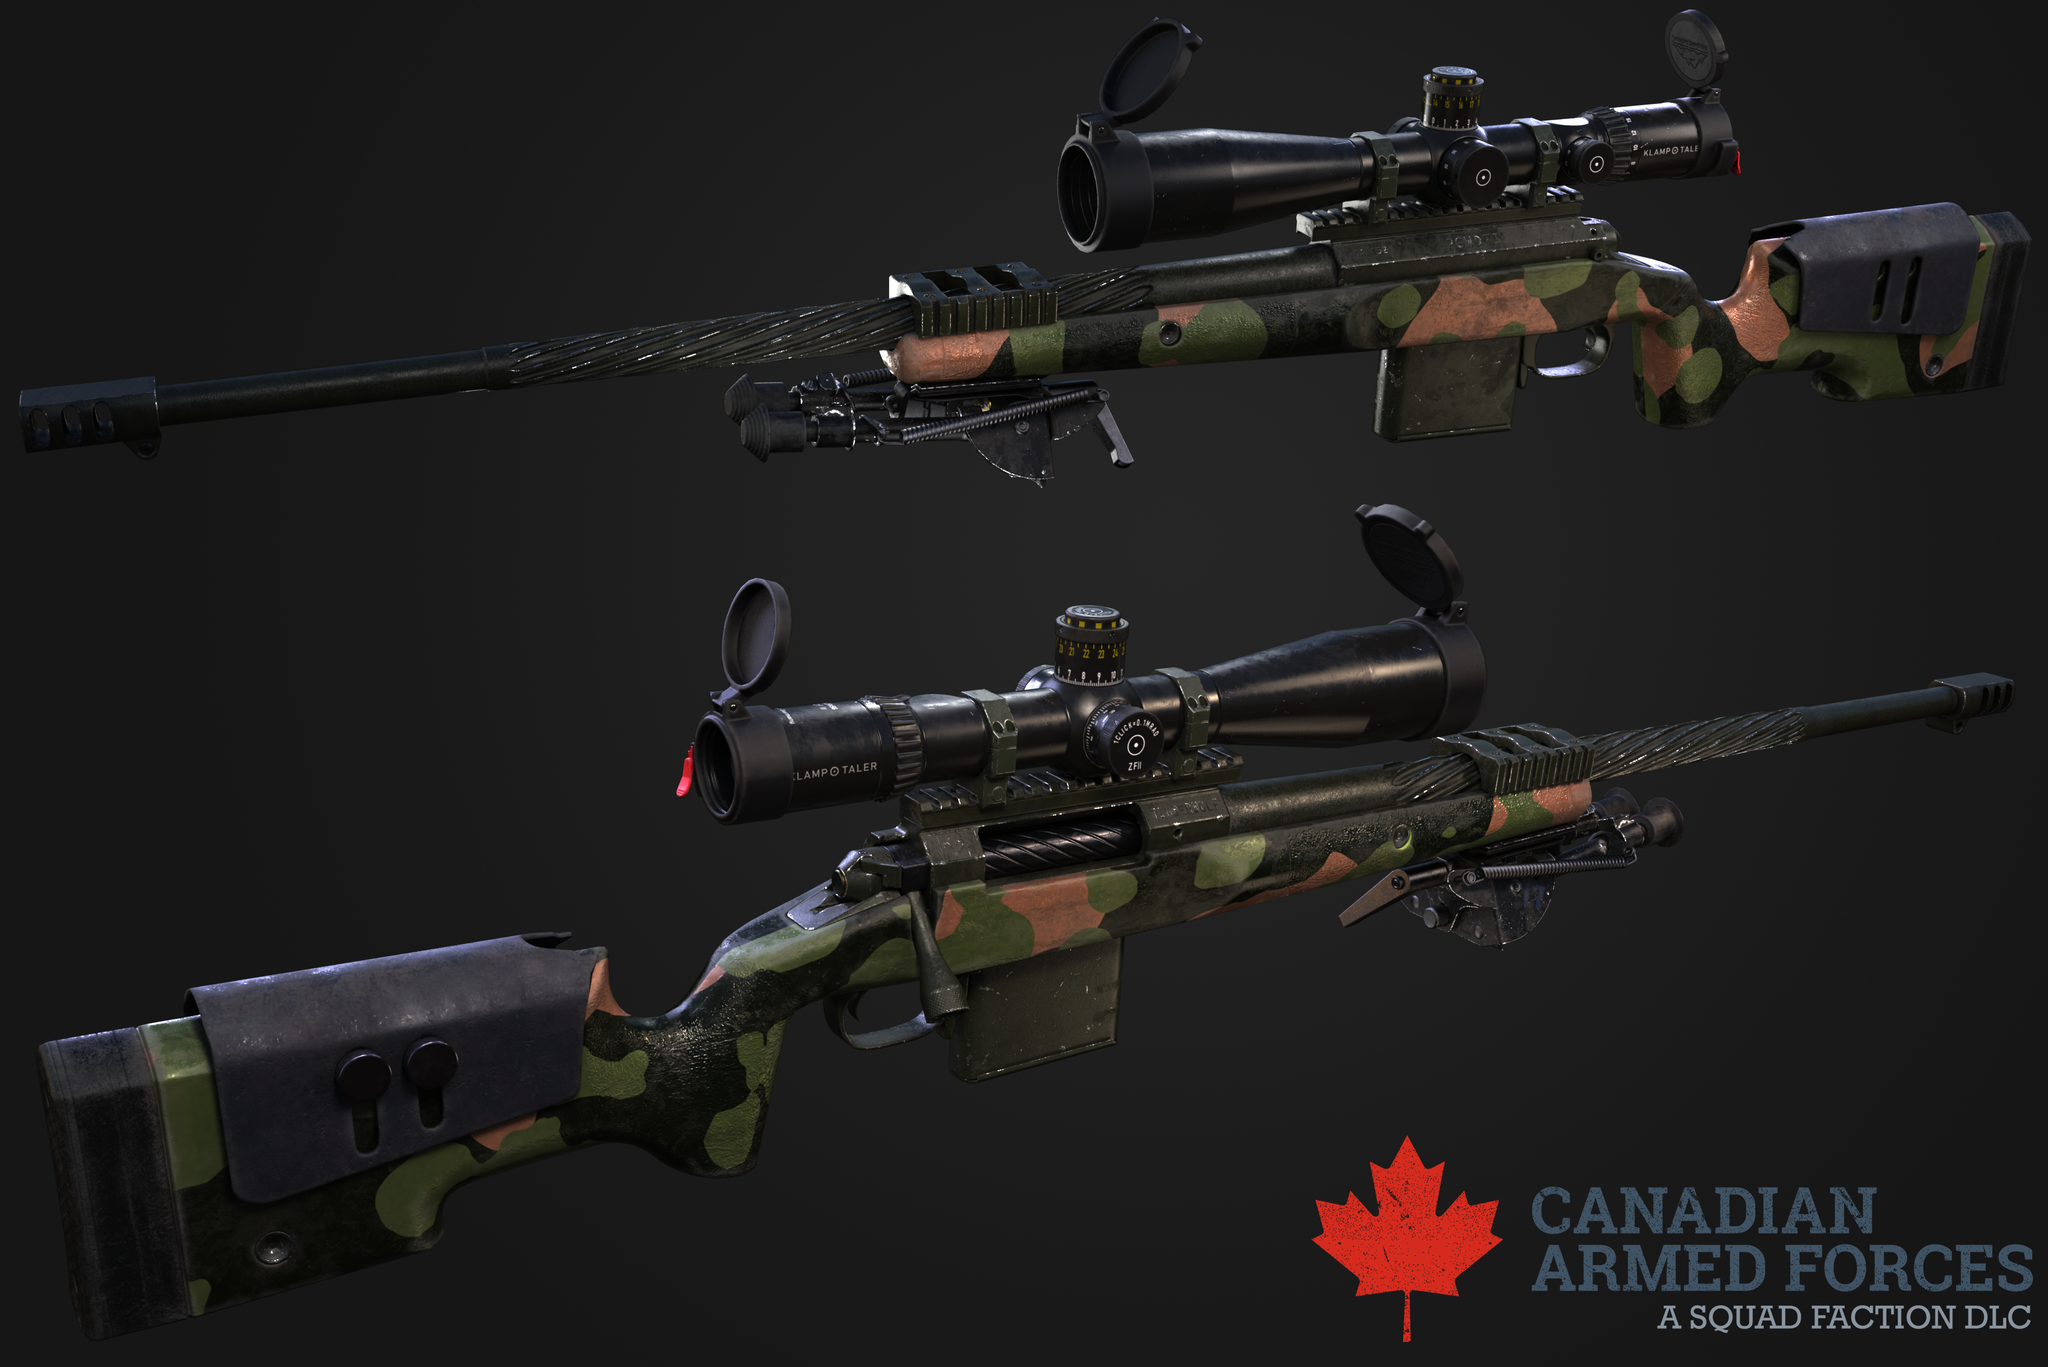 C14 Timberwolf - My, Canada, Computer games, Gamedev, Sniper rifle, Squad, Autodesk Maya, Weapon, 3D modeling